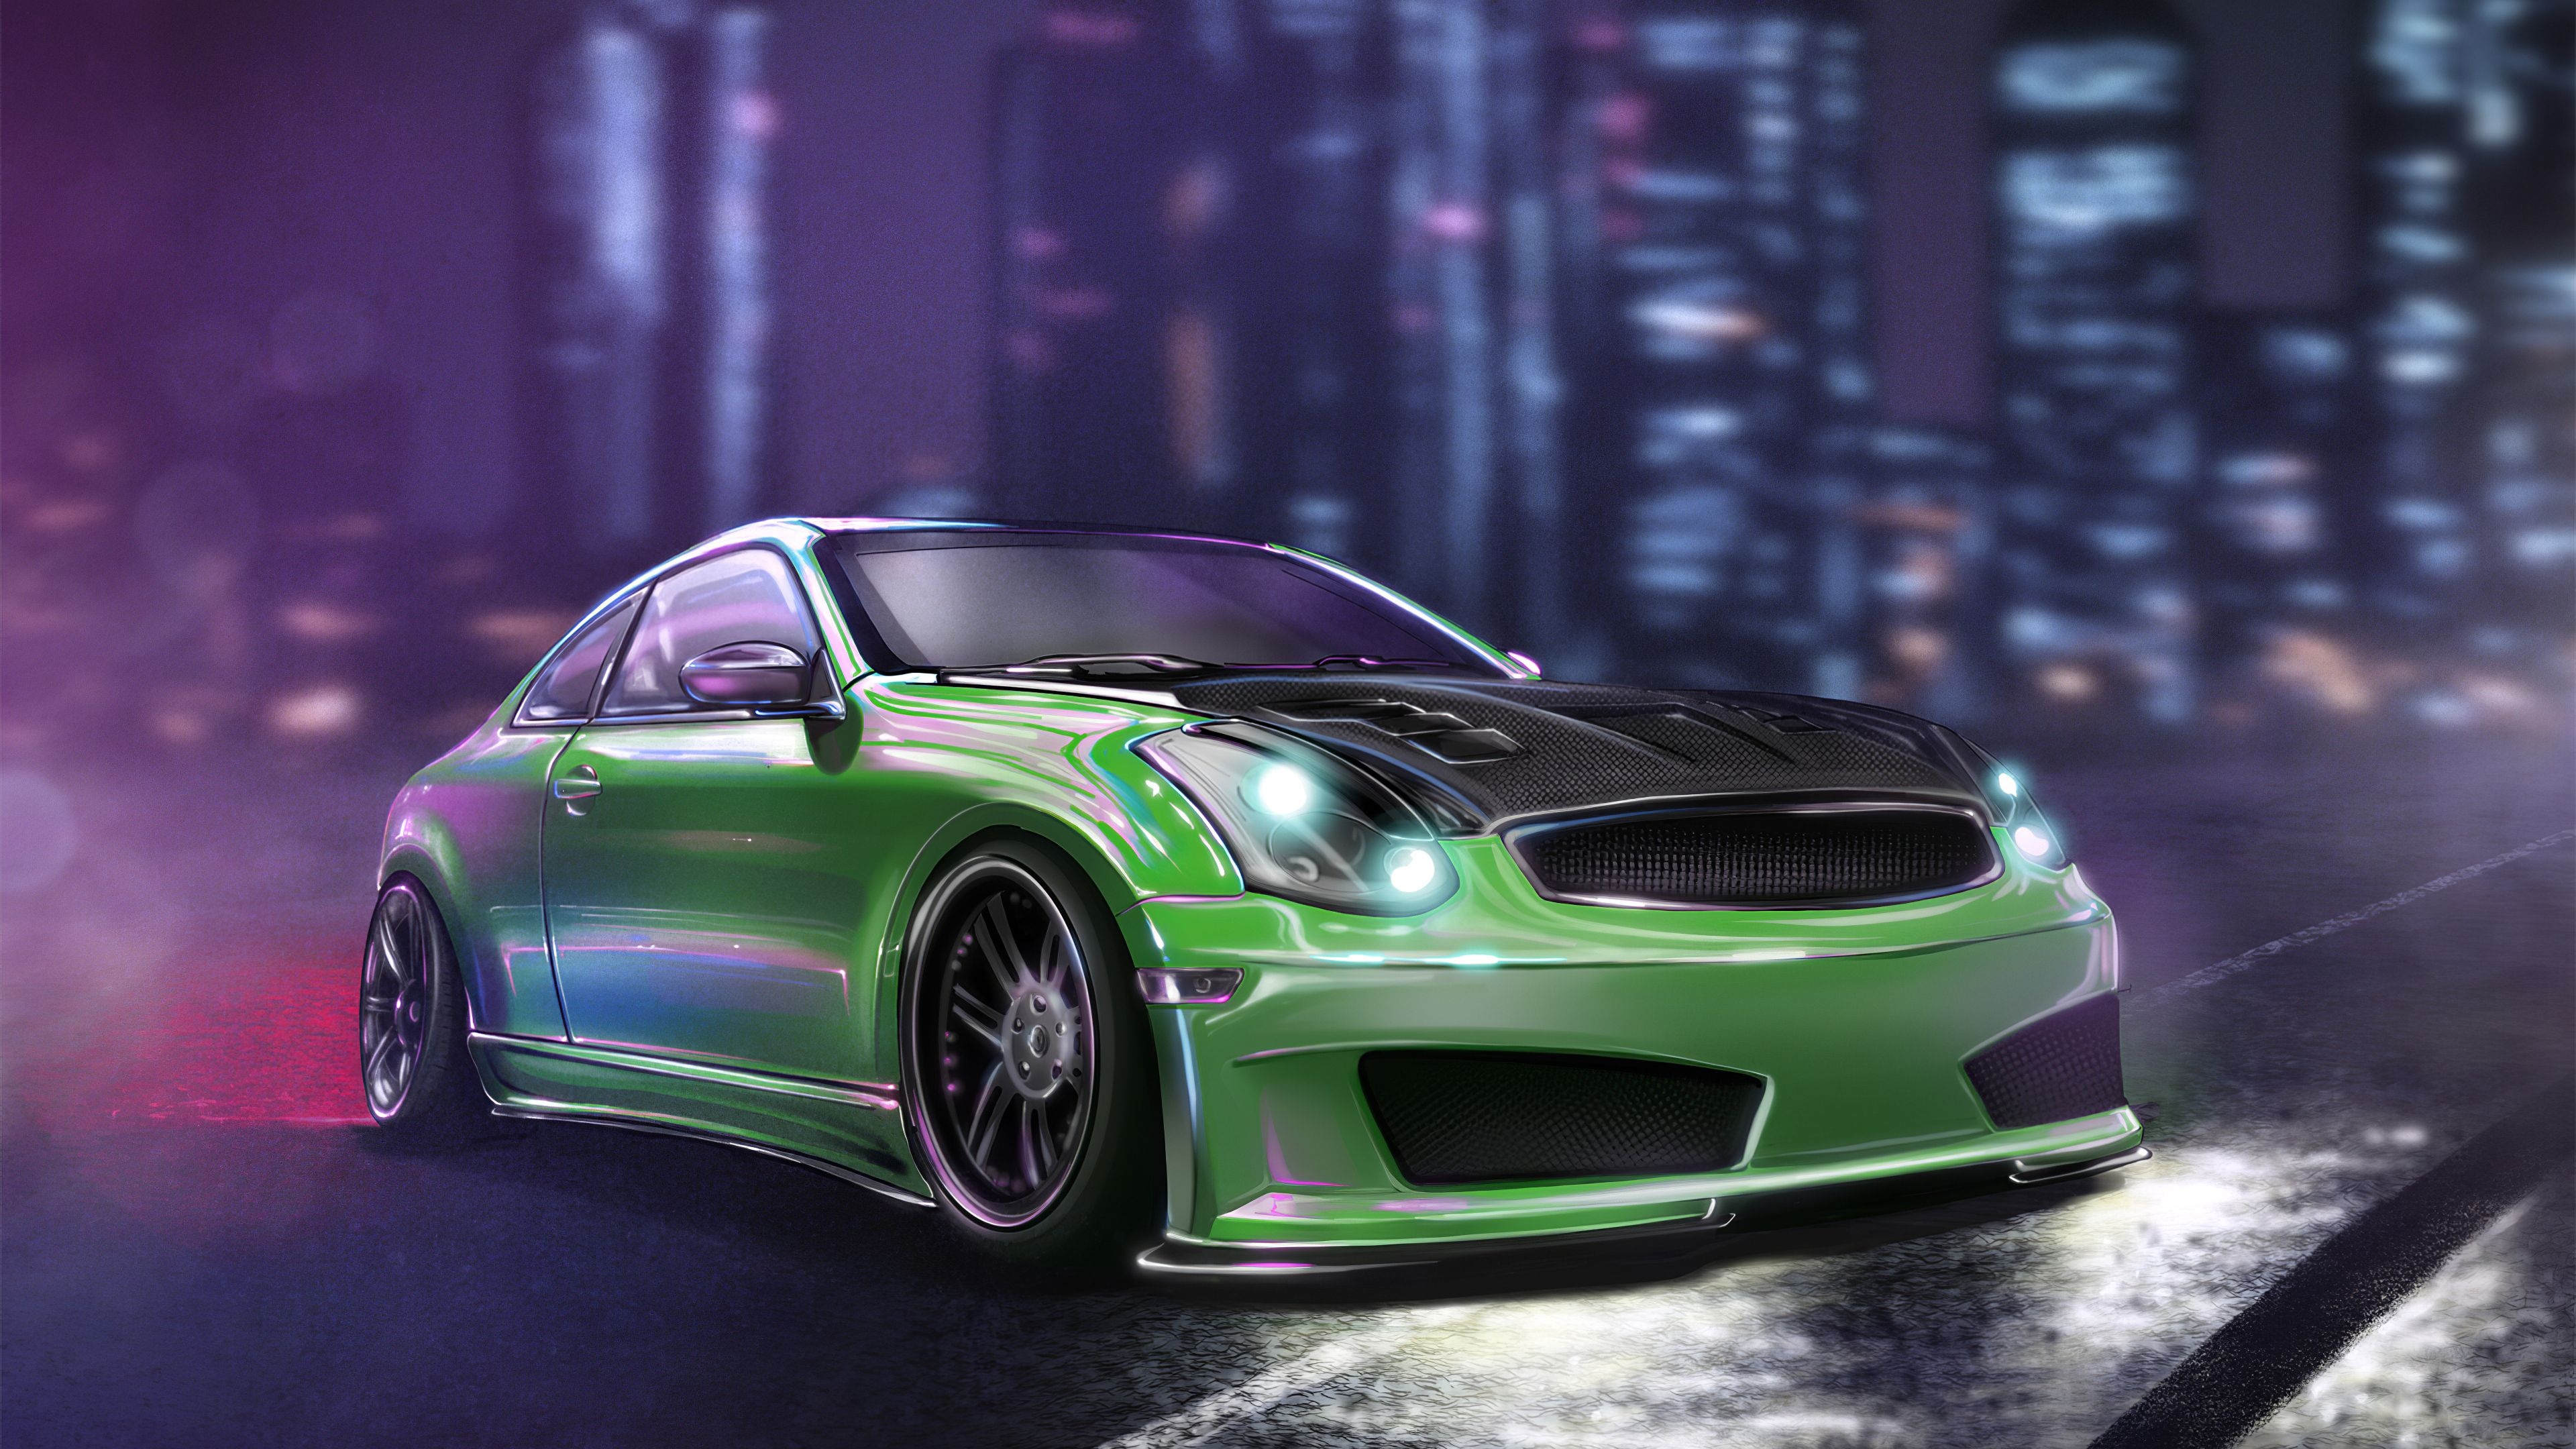 Infiniti G35 Coupe, Sports car extravaganza, Race-ready design, Speed and performance, 3840x2160 4K Desktop